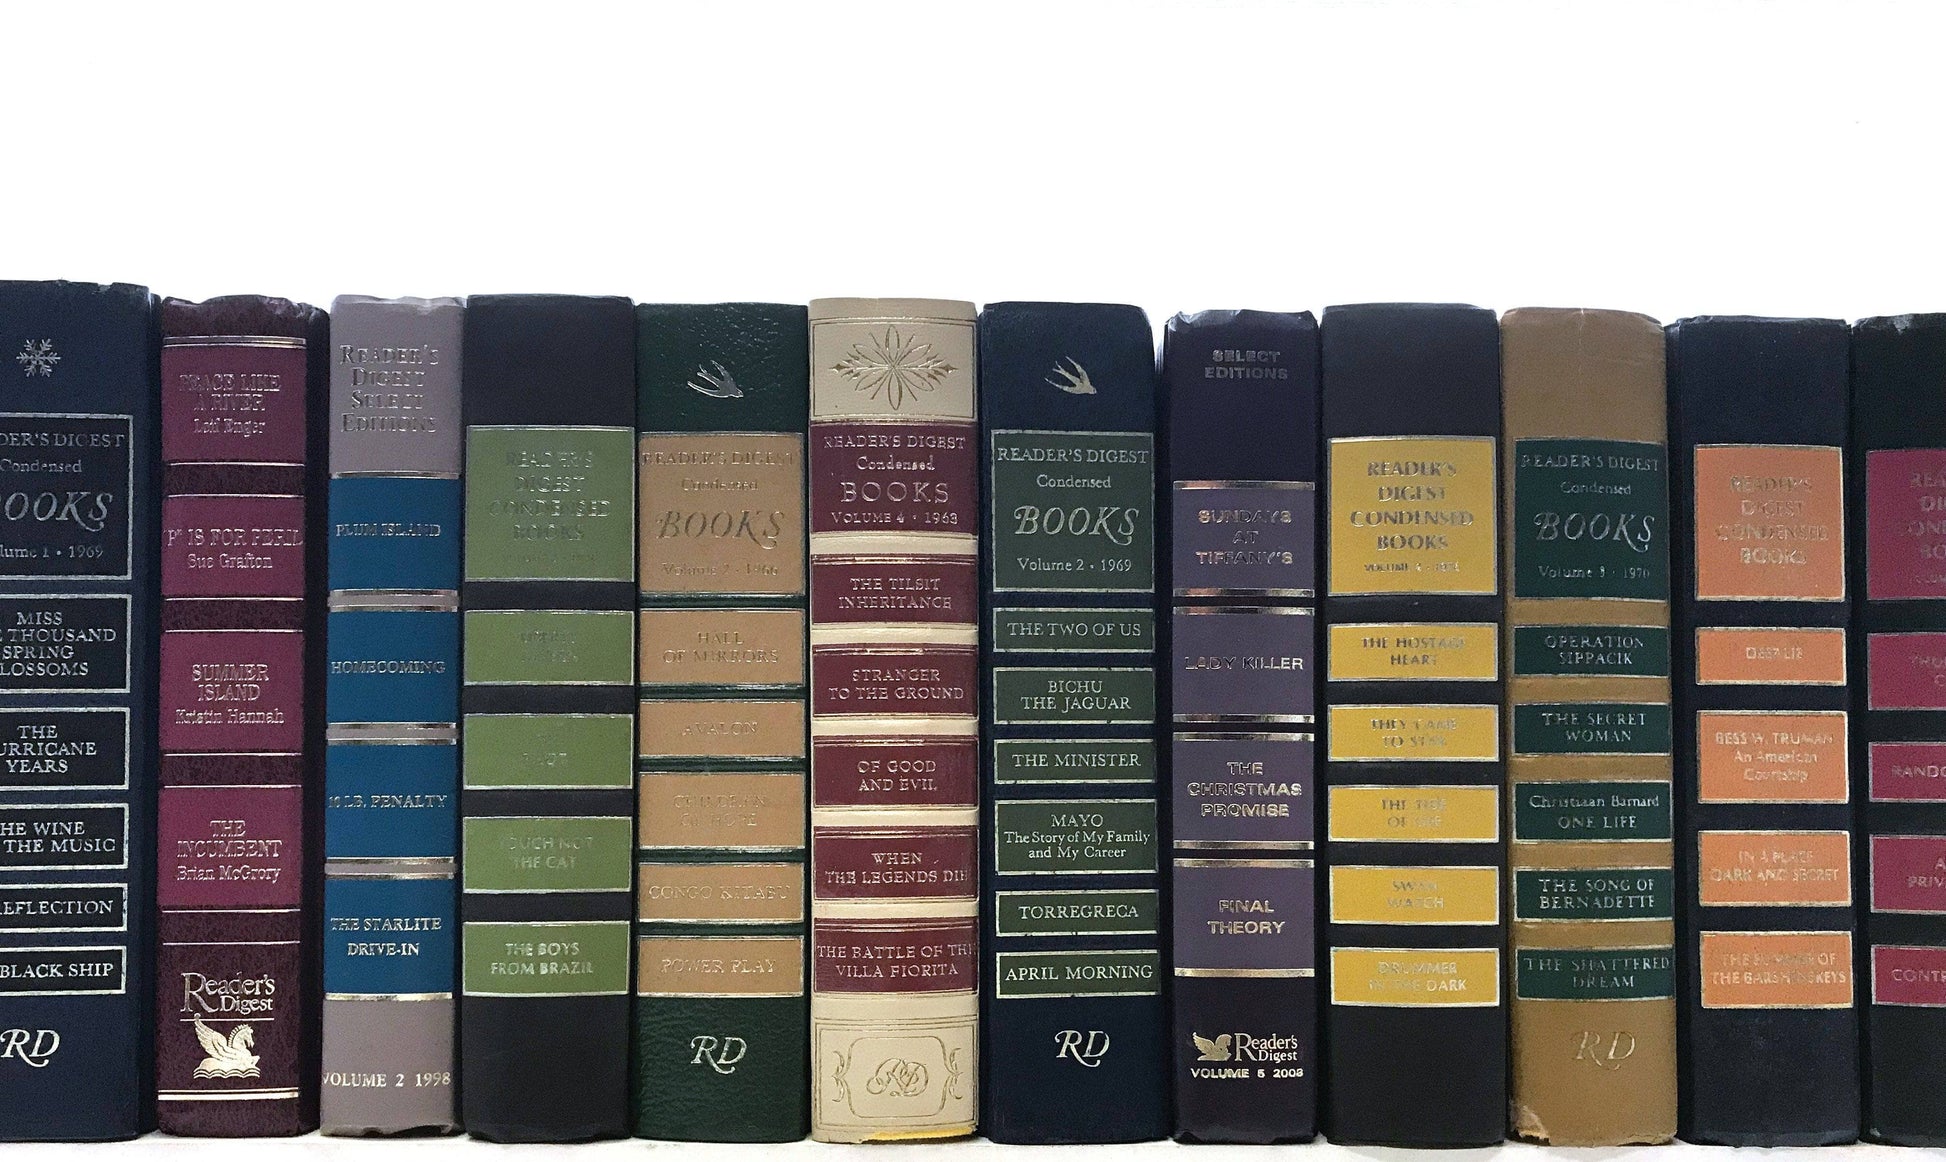 Readers Digest Condensed Books Best Sellers Lot of 15 Decorative Book Shelf  